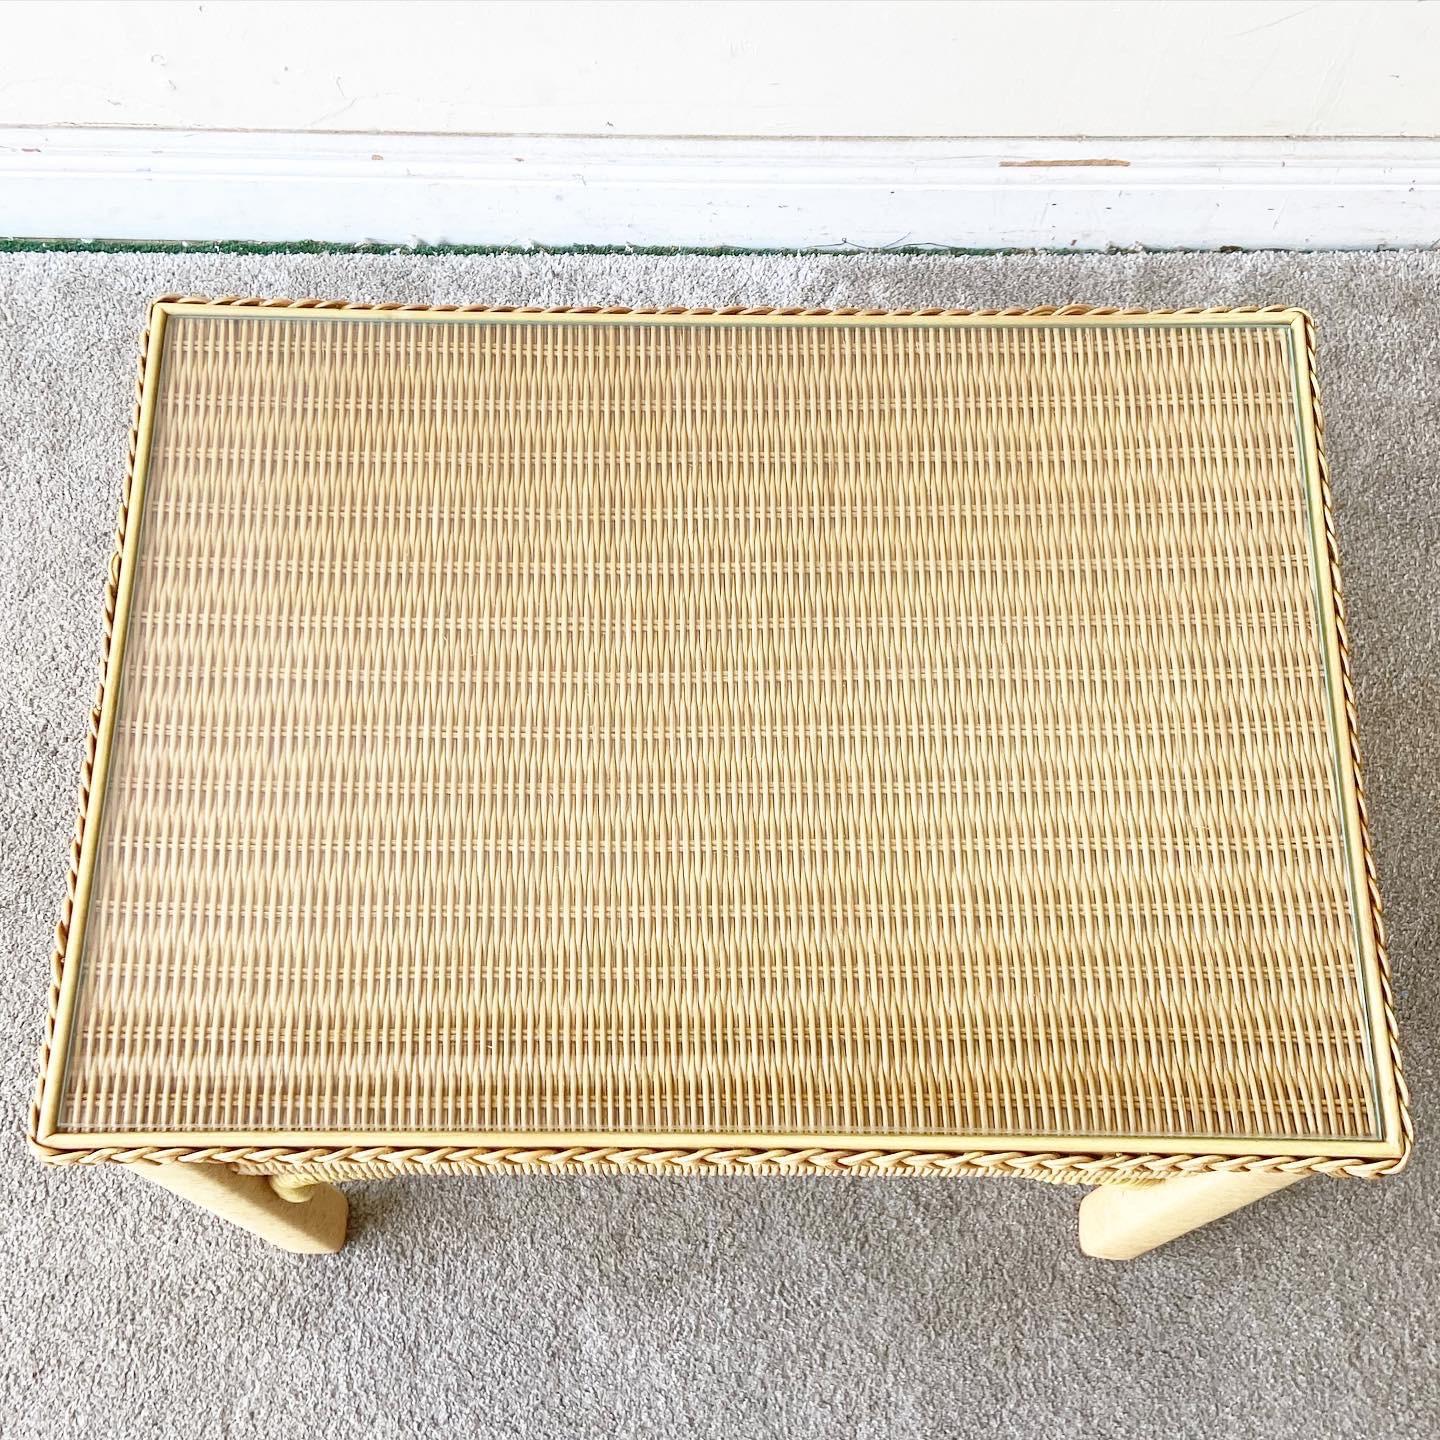 Late 20th Century Bohemian Henry Link Wicker Glass Top Side Table